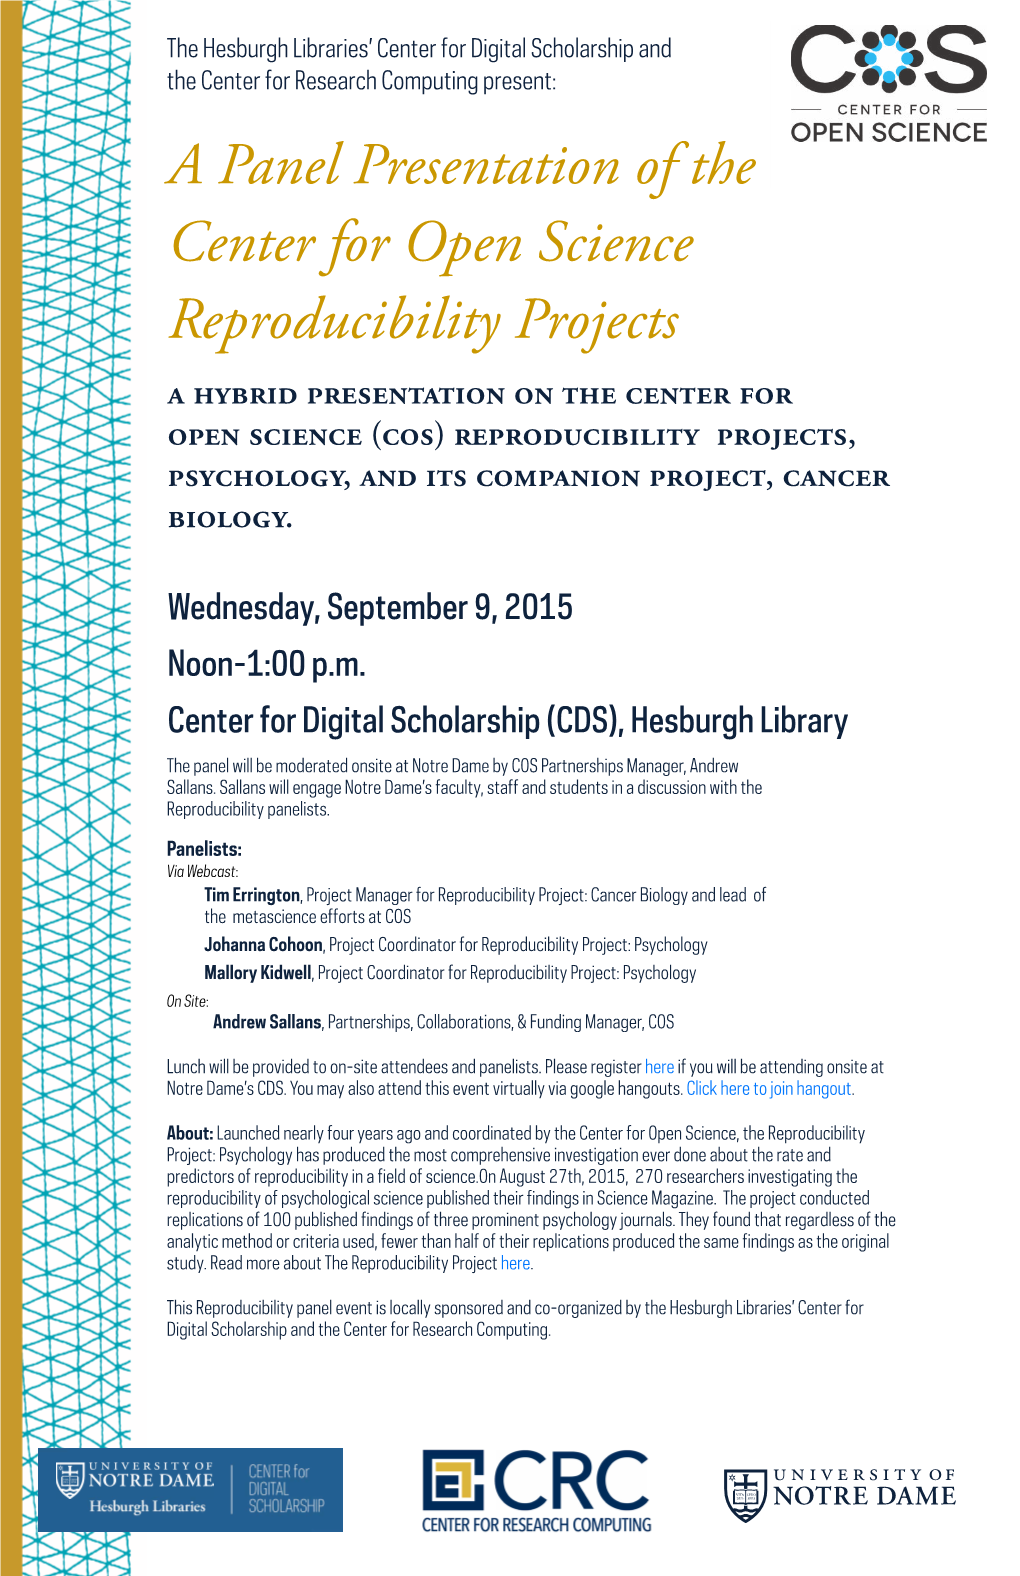 A Panel Presentation of the Center for Open Science Reproducibility